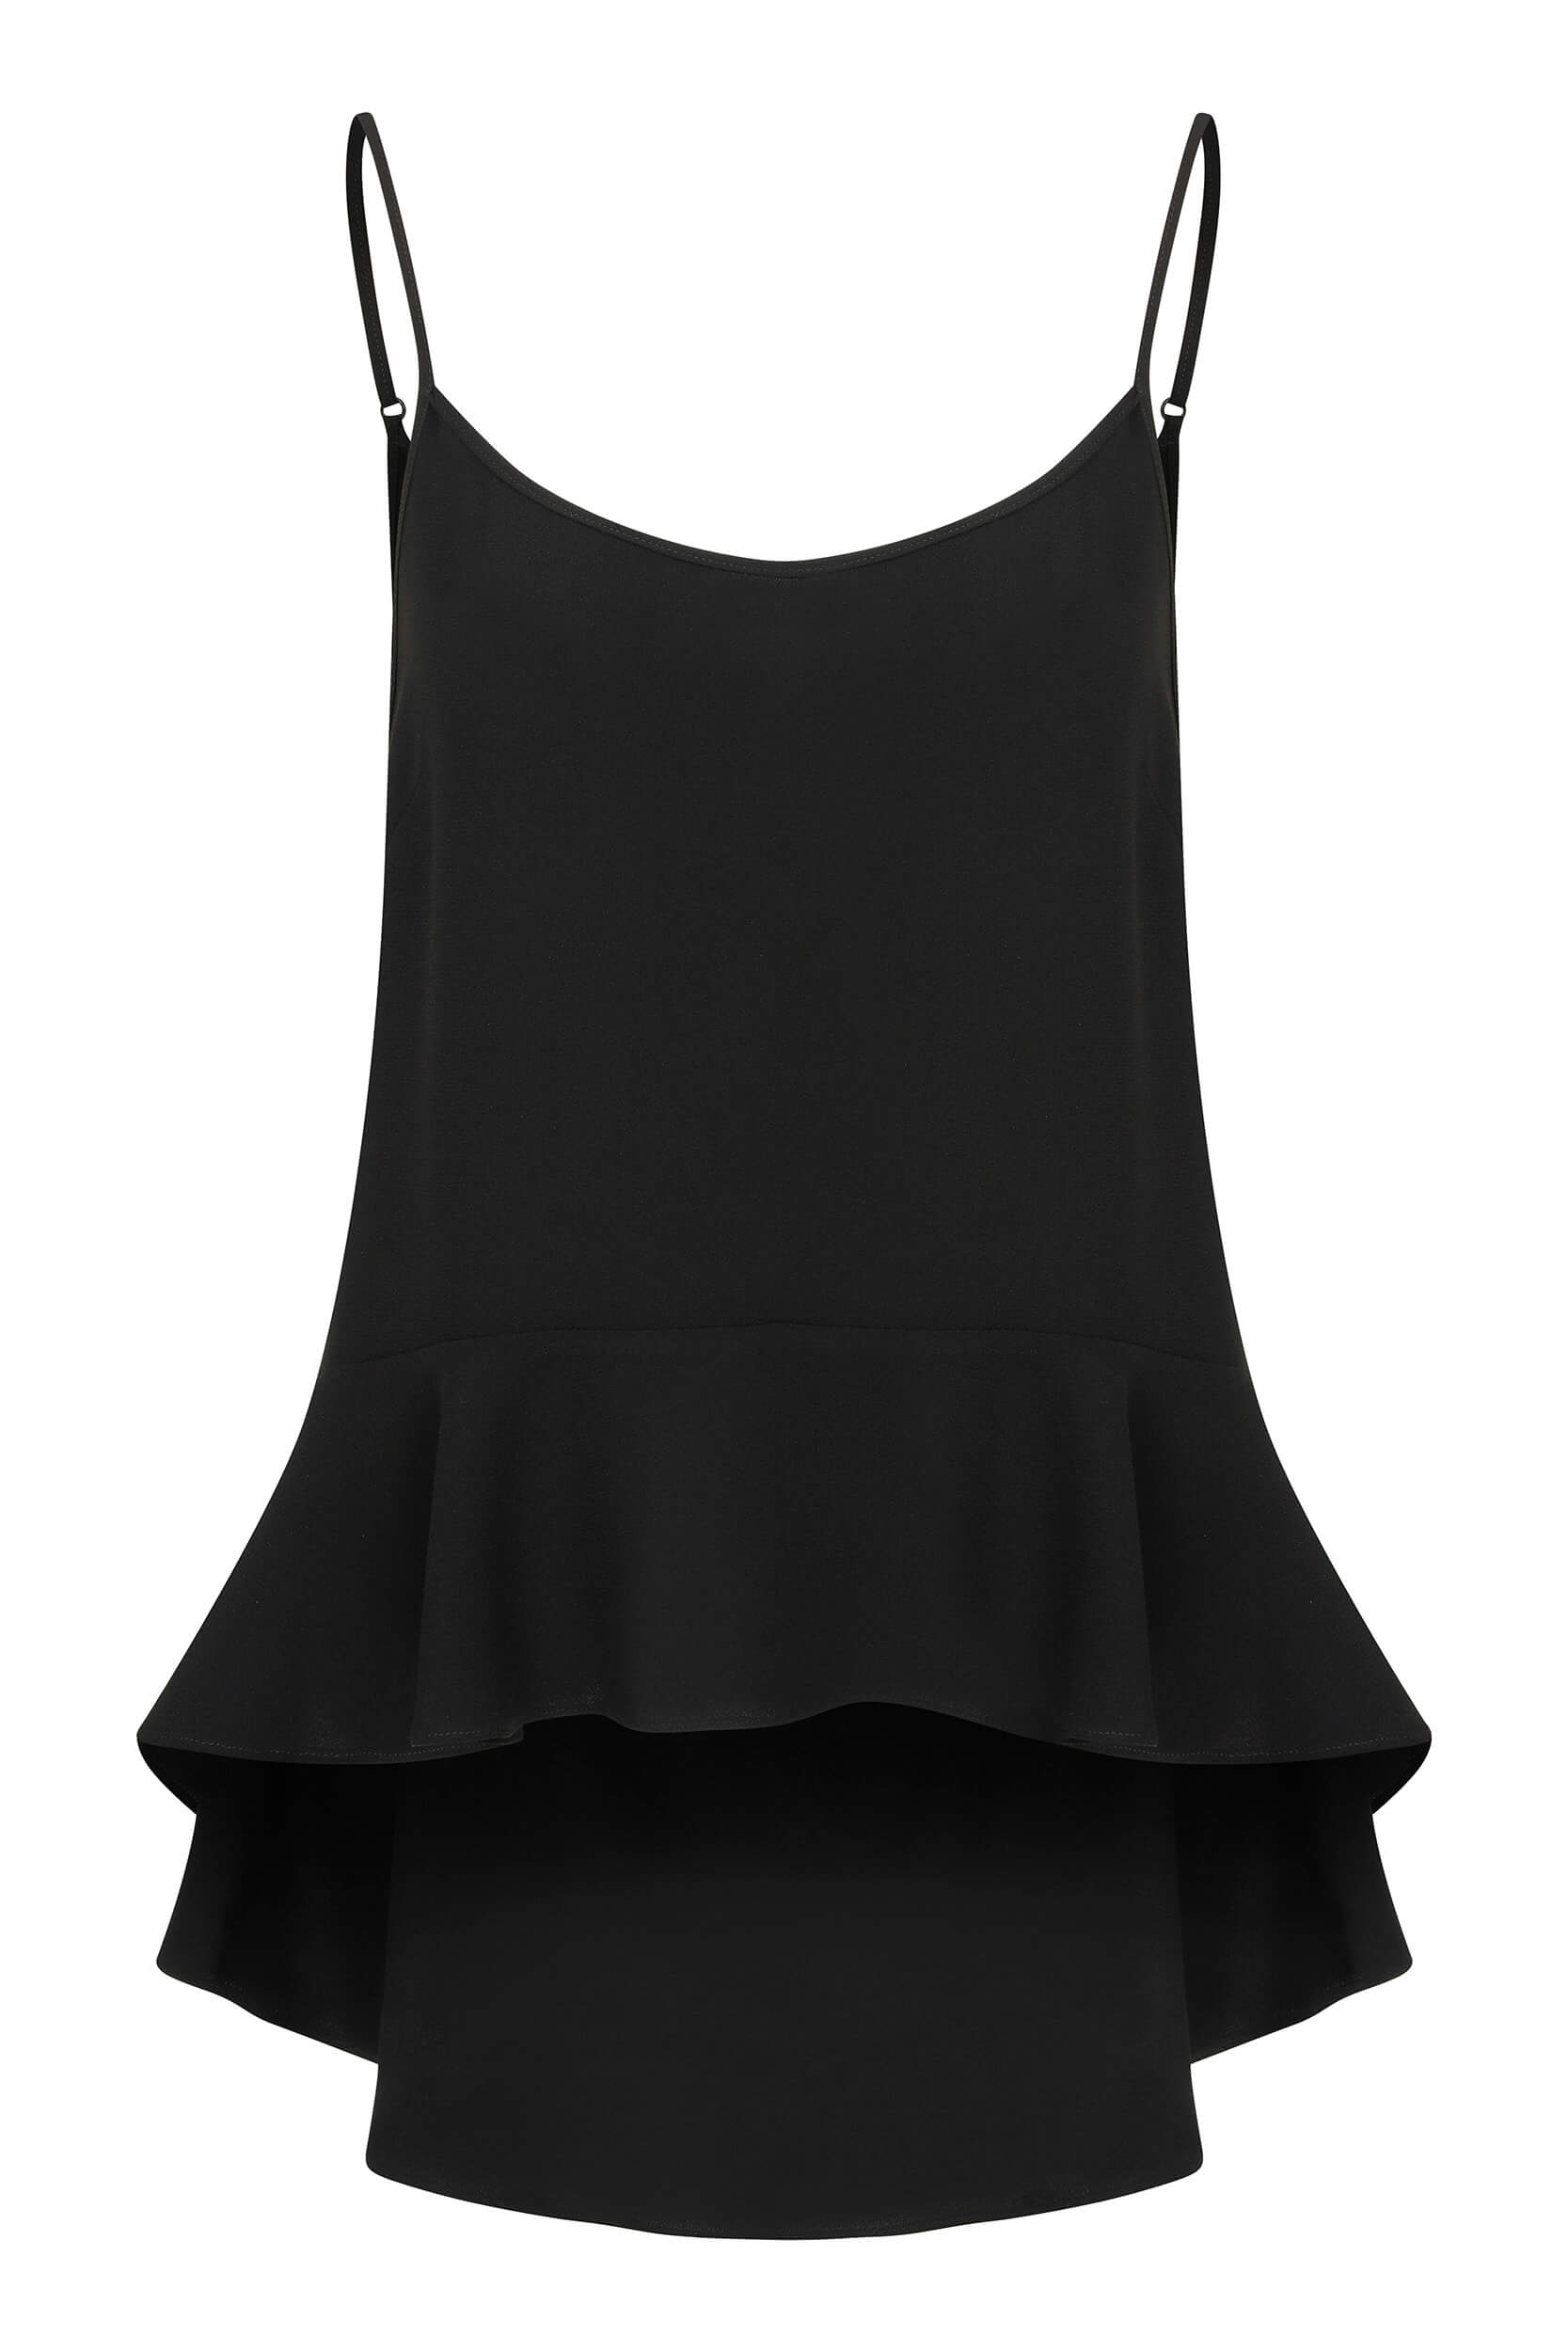 Roman Solid Camisole in black (HOT!) - 8681822201954